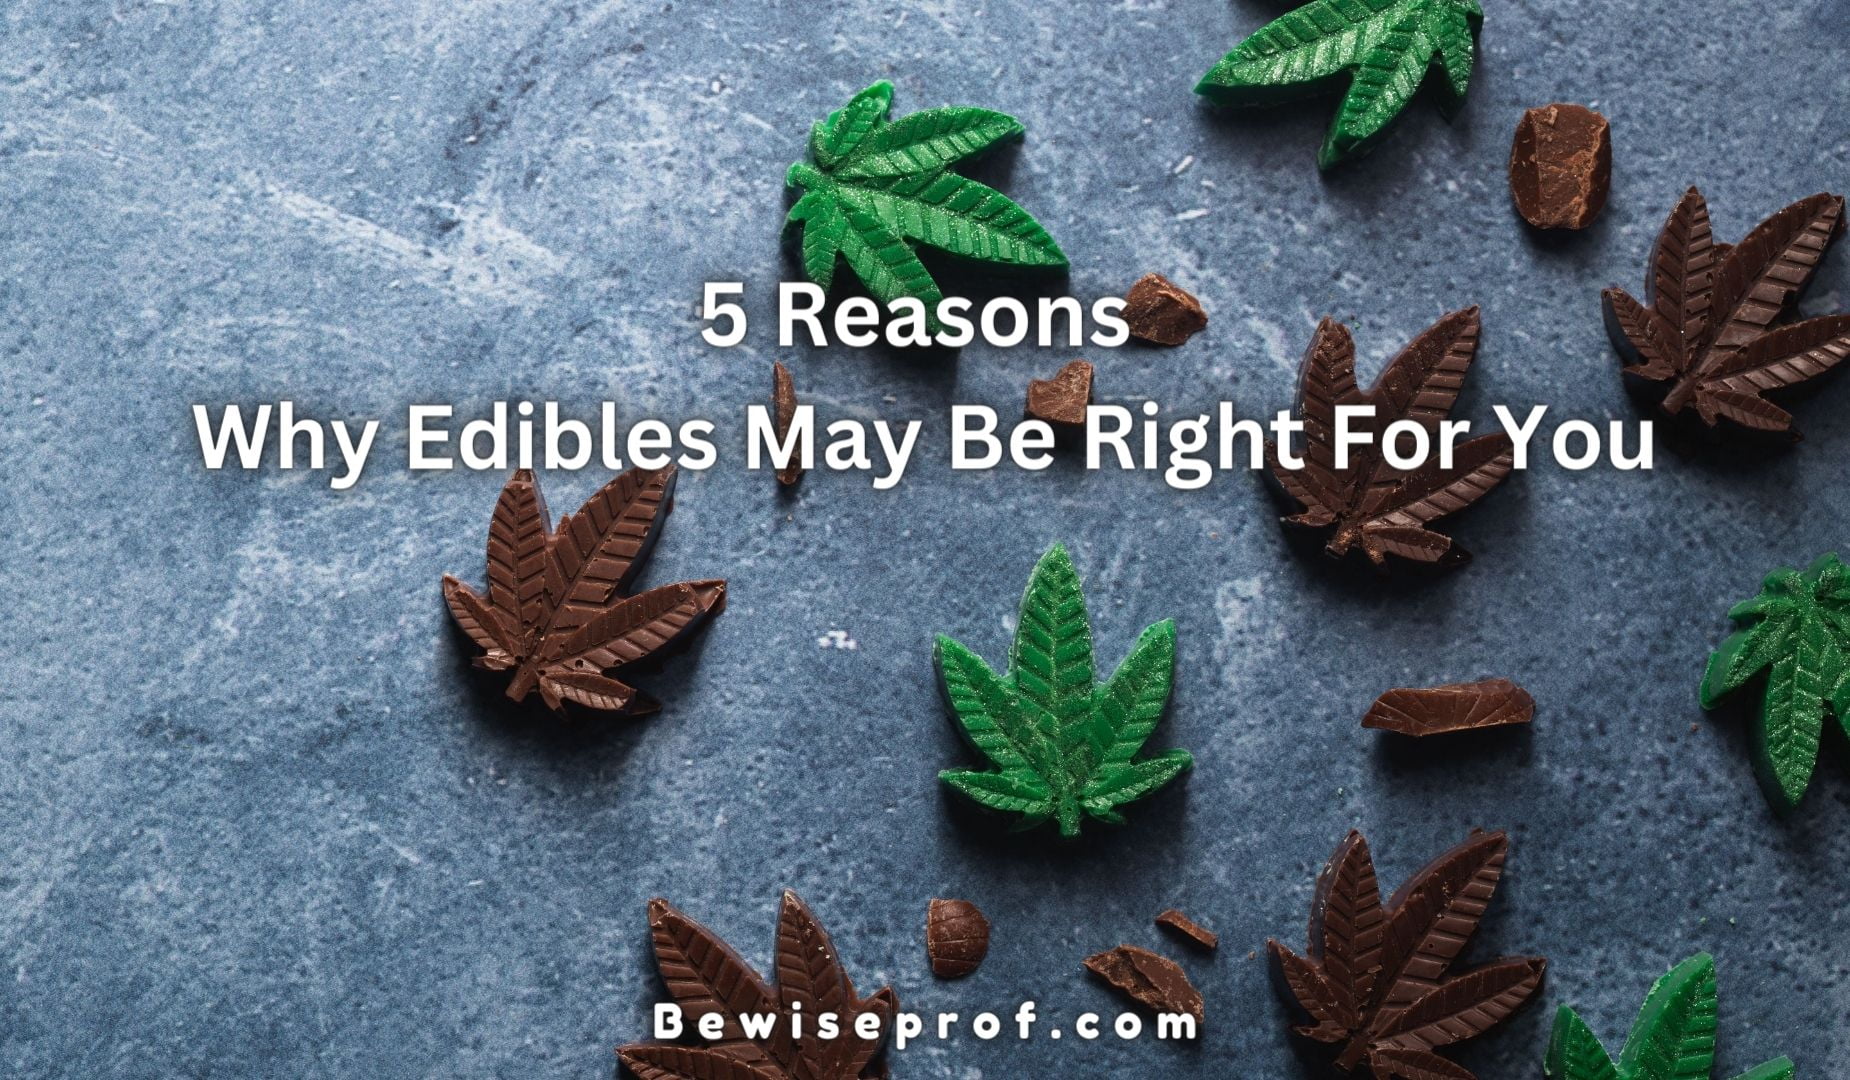 5 Reasons Why Edibles May Be Right For You